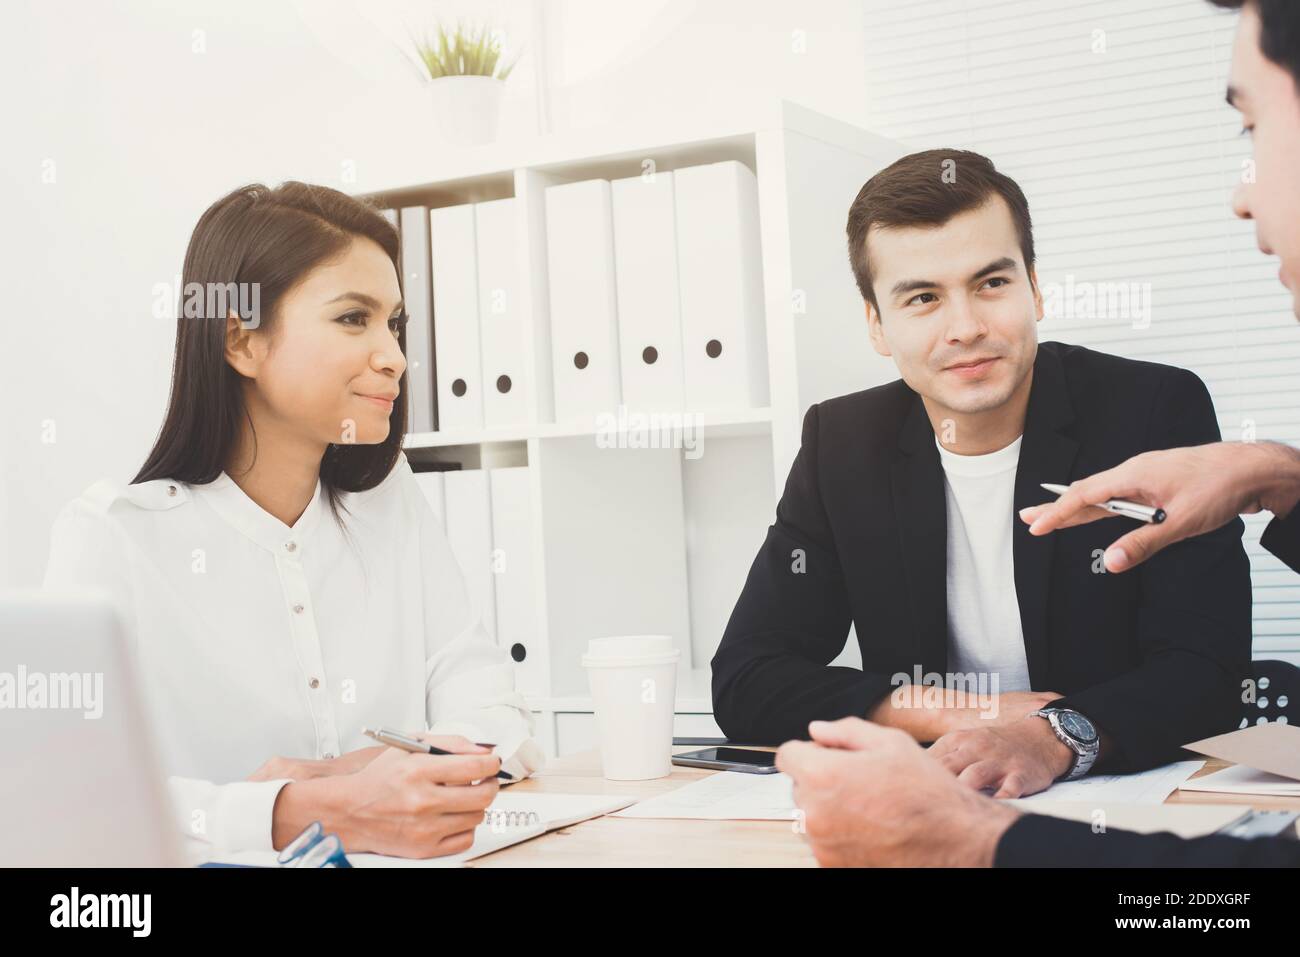 Business people discussing work in the meeting Stock Photo